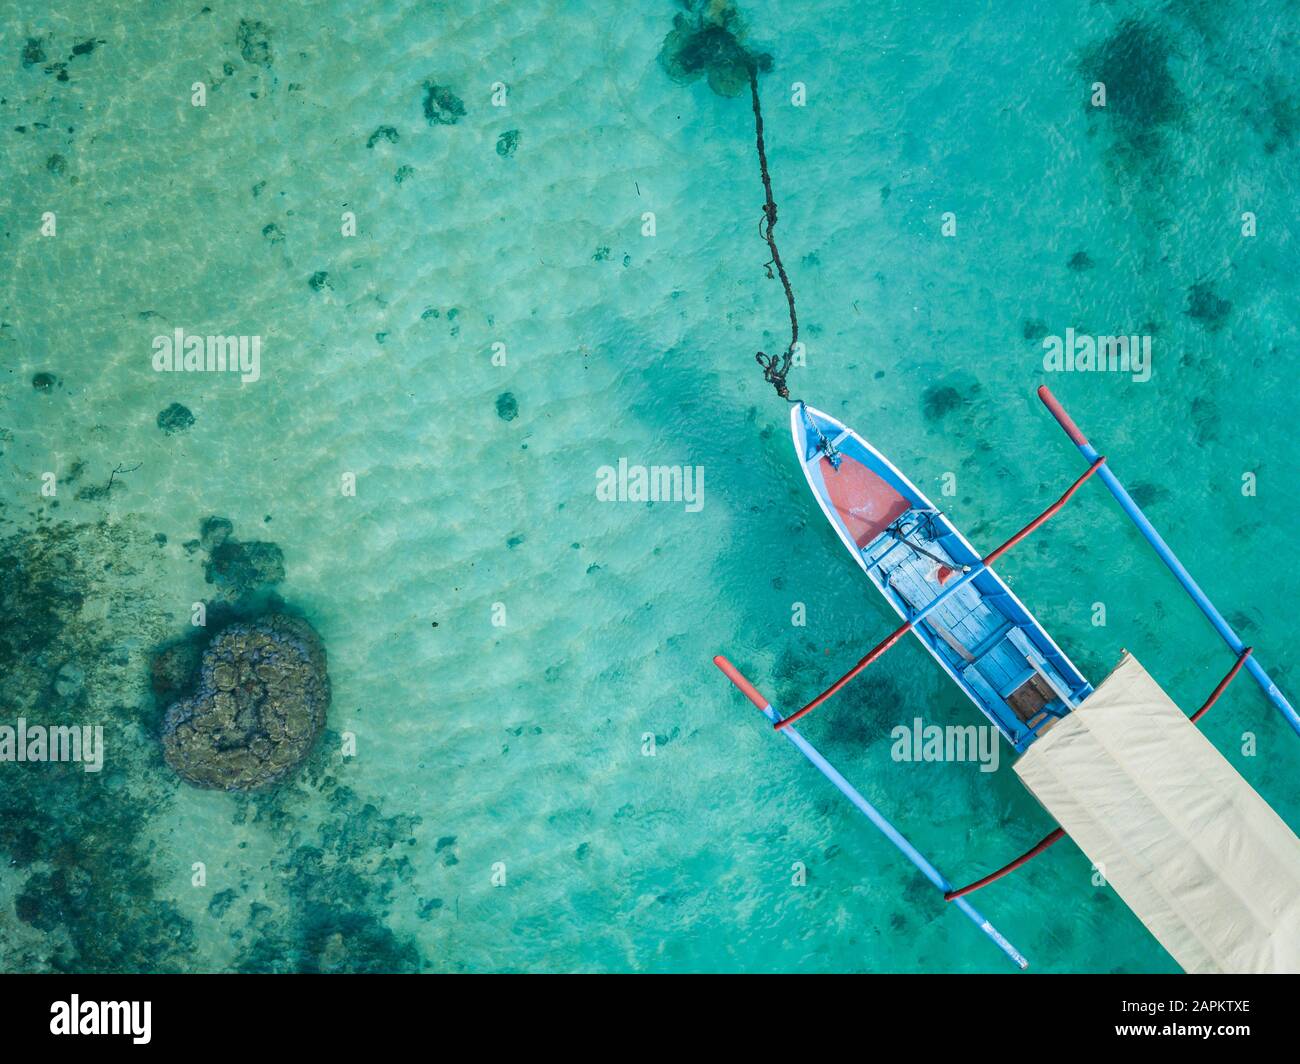 Indonesia, Subawa, Aerial view of outrigger boat Stock Photo